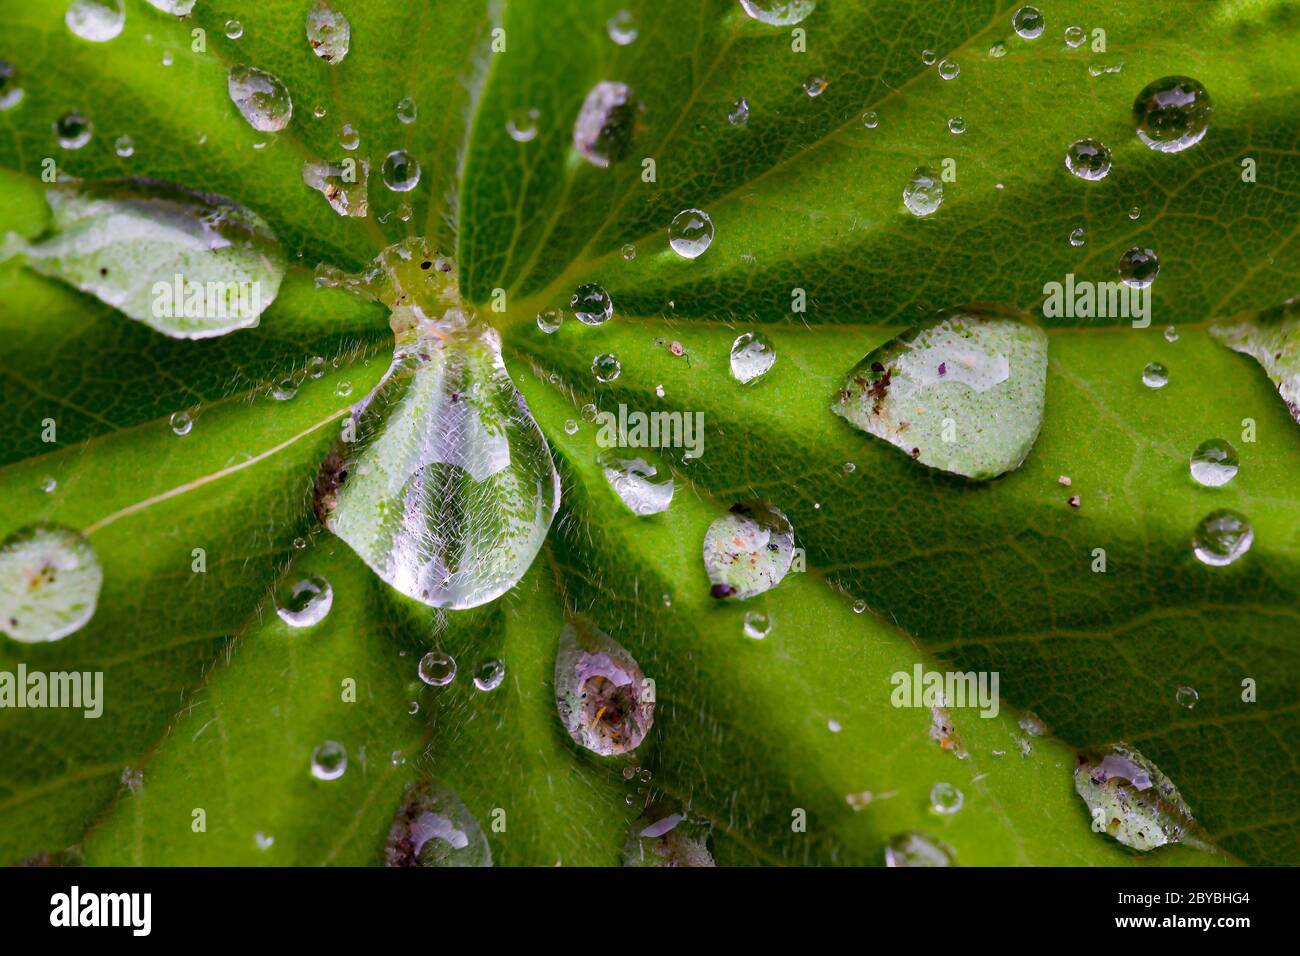 Close up of a rain soaked leaf of Alchemilla Mollis, or Lady's Mantle Stock Photo